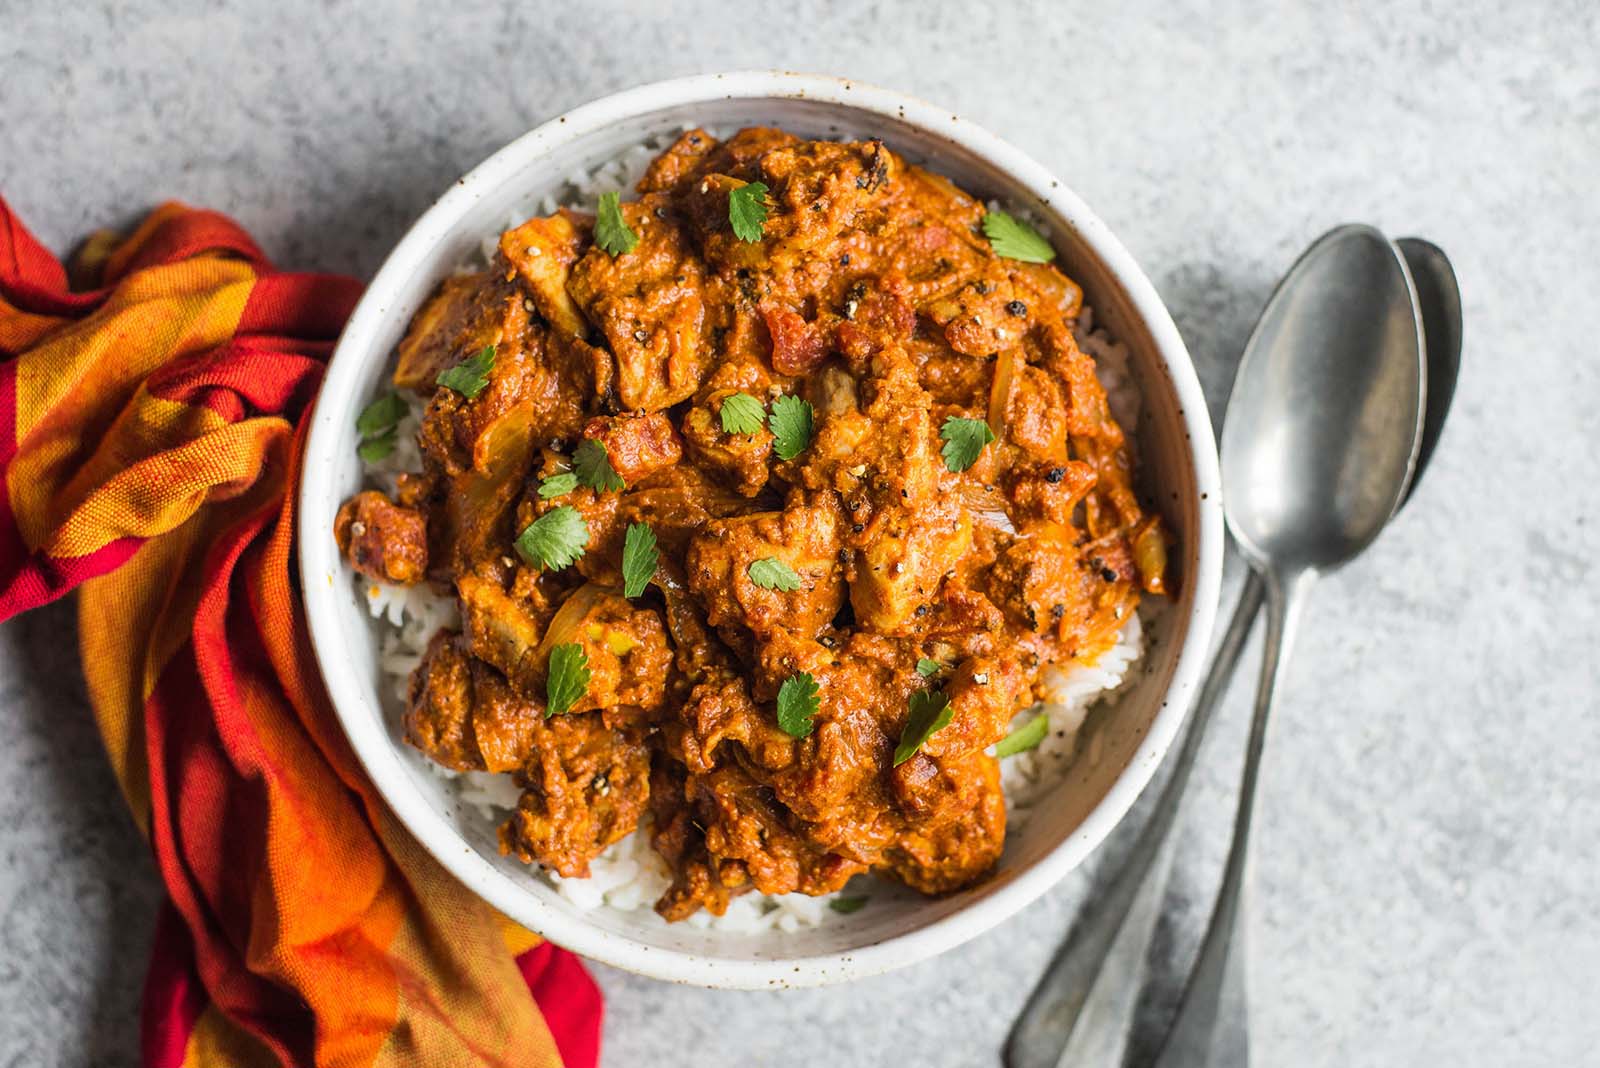 Chicken Tikka Masala finished dish in a bowl with spoons and rice.